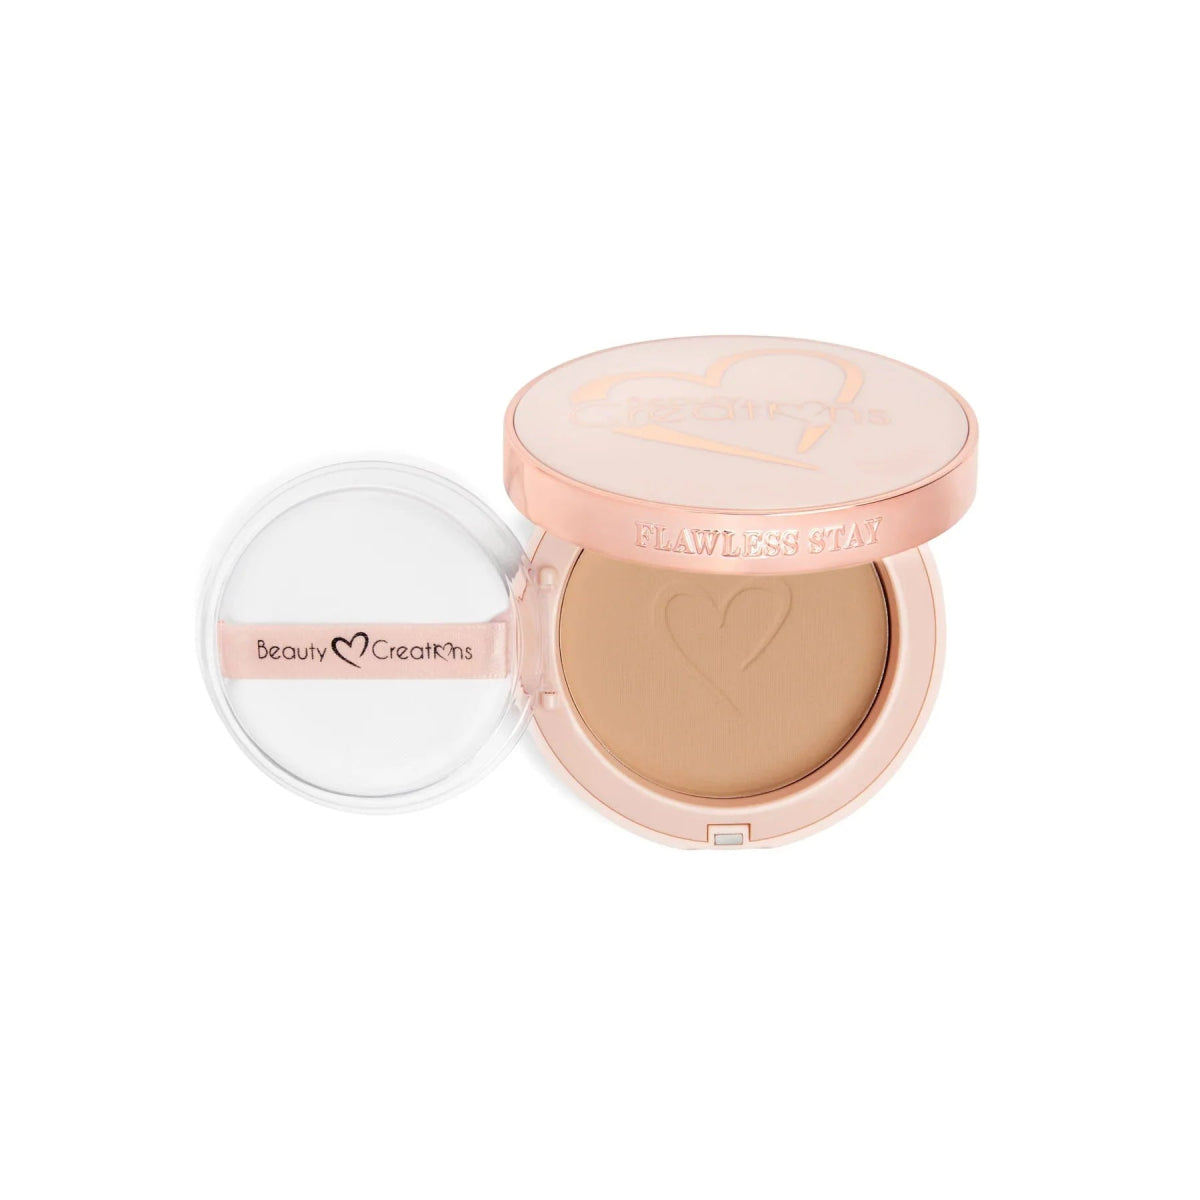 BCC Backup-Cosmetics-Beauty Creations - Base En Polvo Flawless Stay - Polvo Compacto-FSP5.5